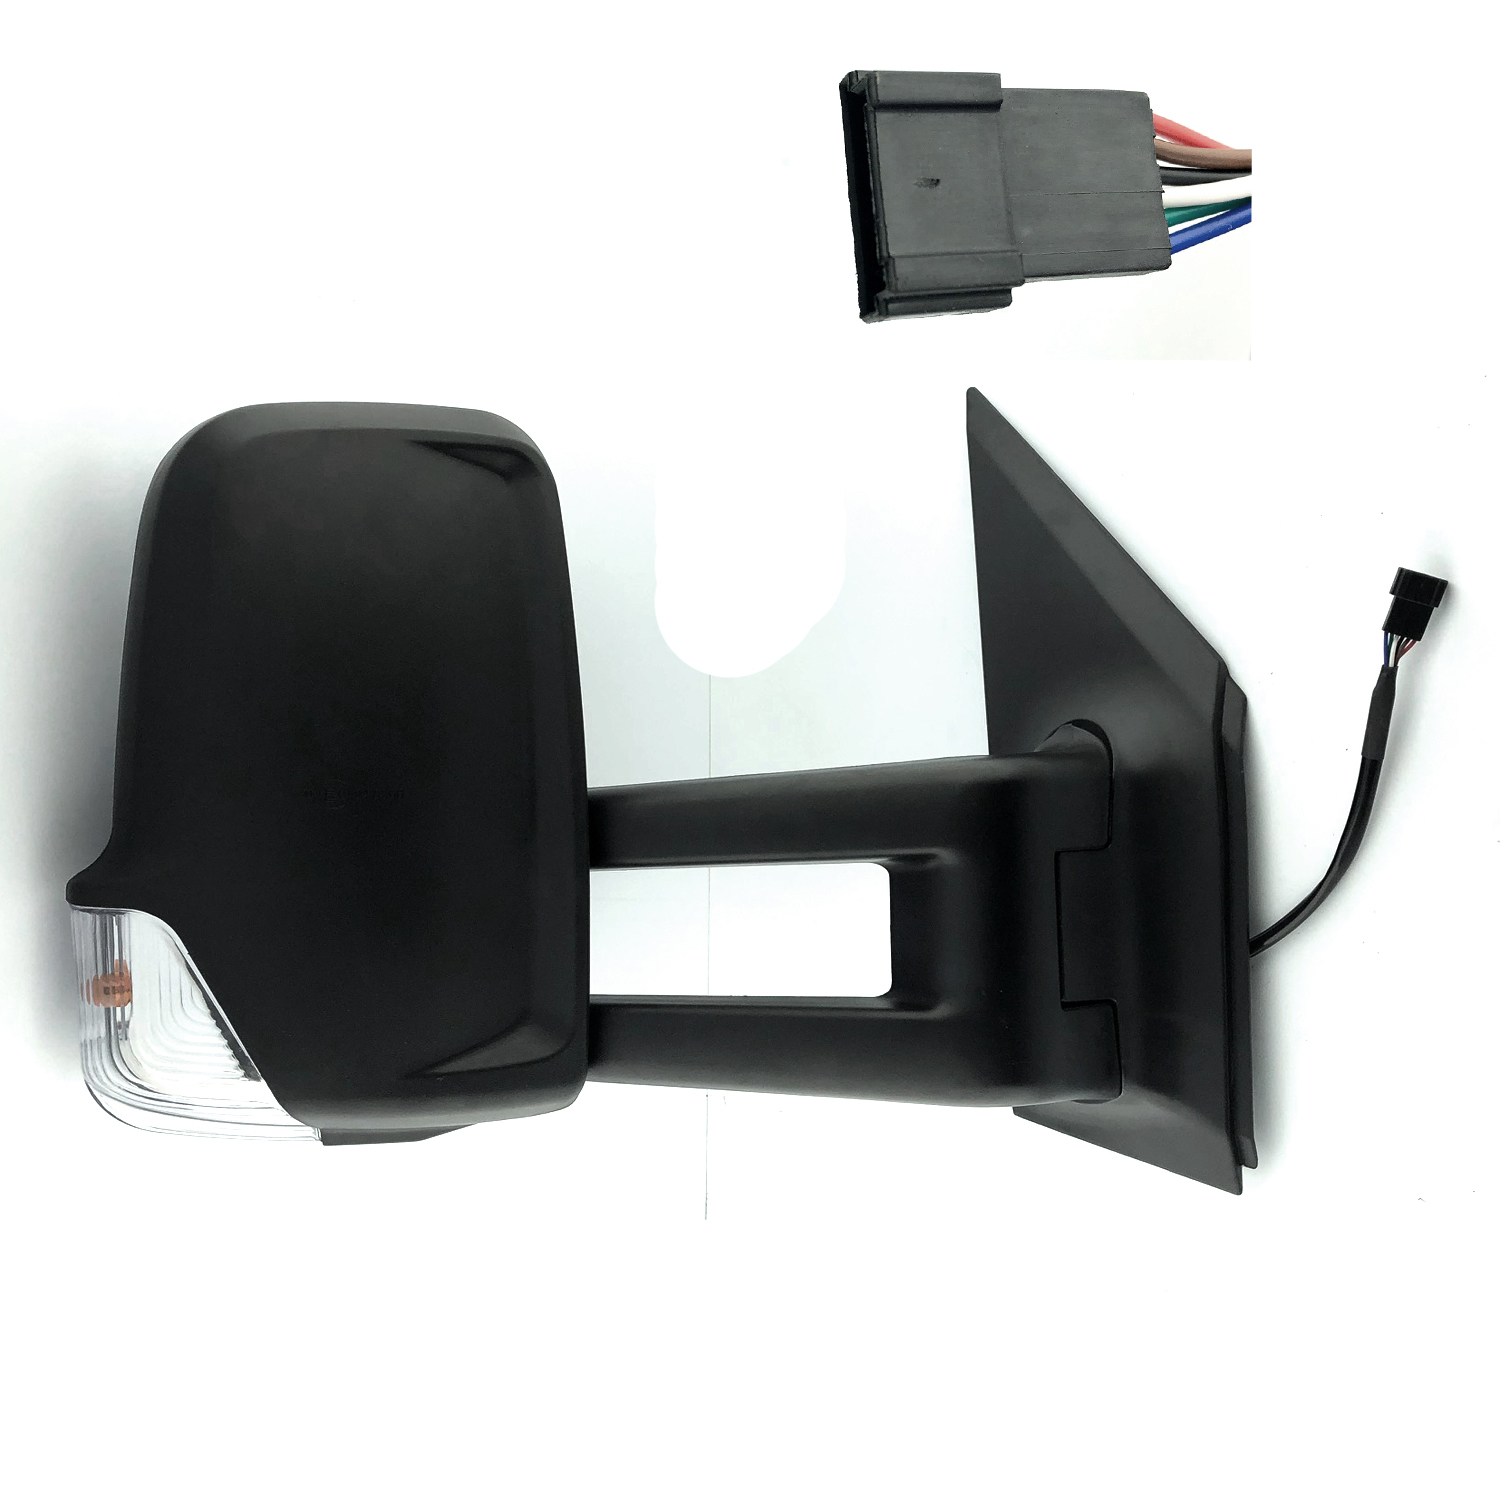 Mercedes Sprinter CHASSIS CAB Complete Wing Mirror Unit RIGHT HAND ( UK Driver Side ) 2006 to 2011 – Electric Wing Mirror Unit ( Long Arm )